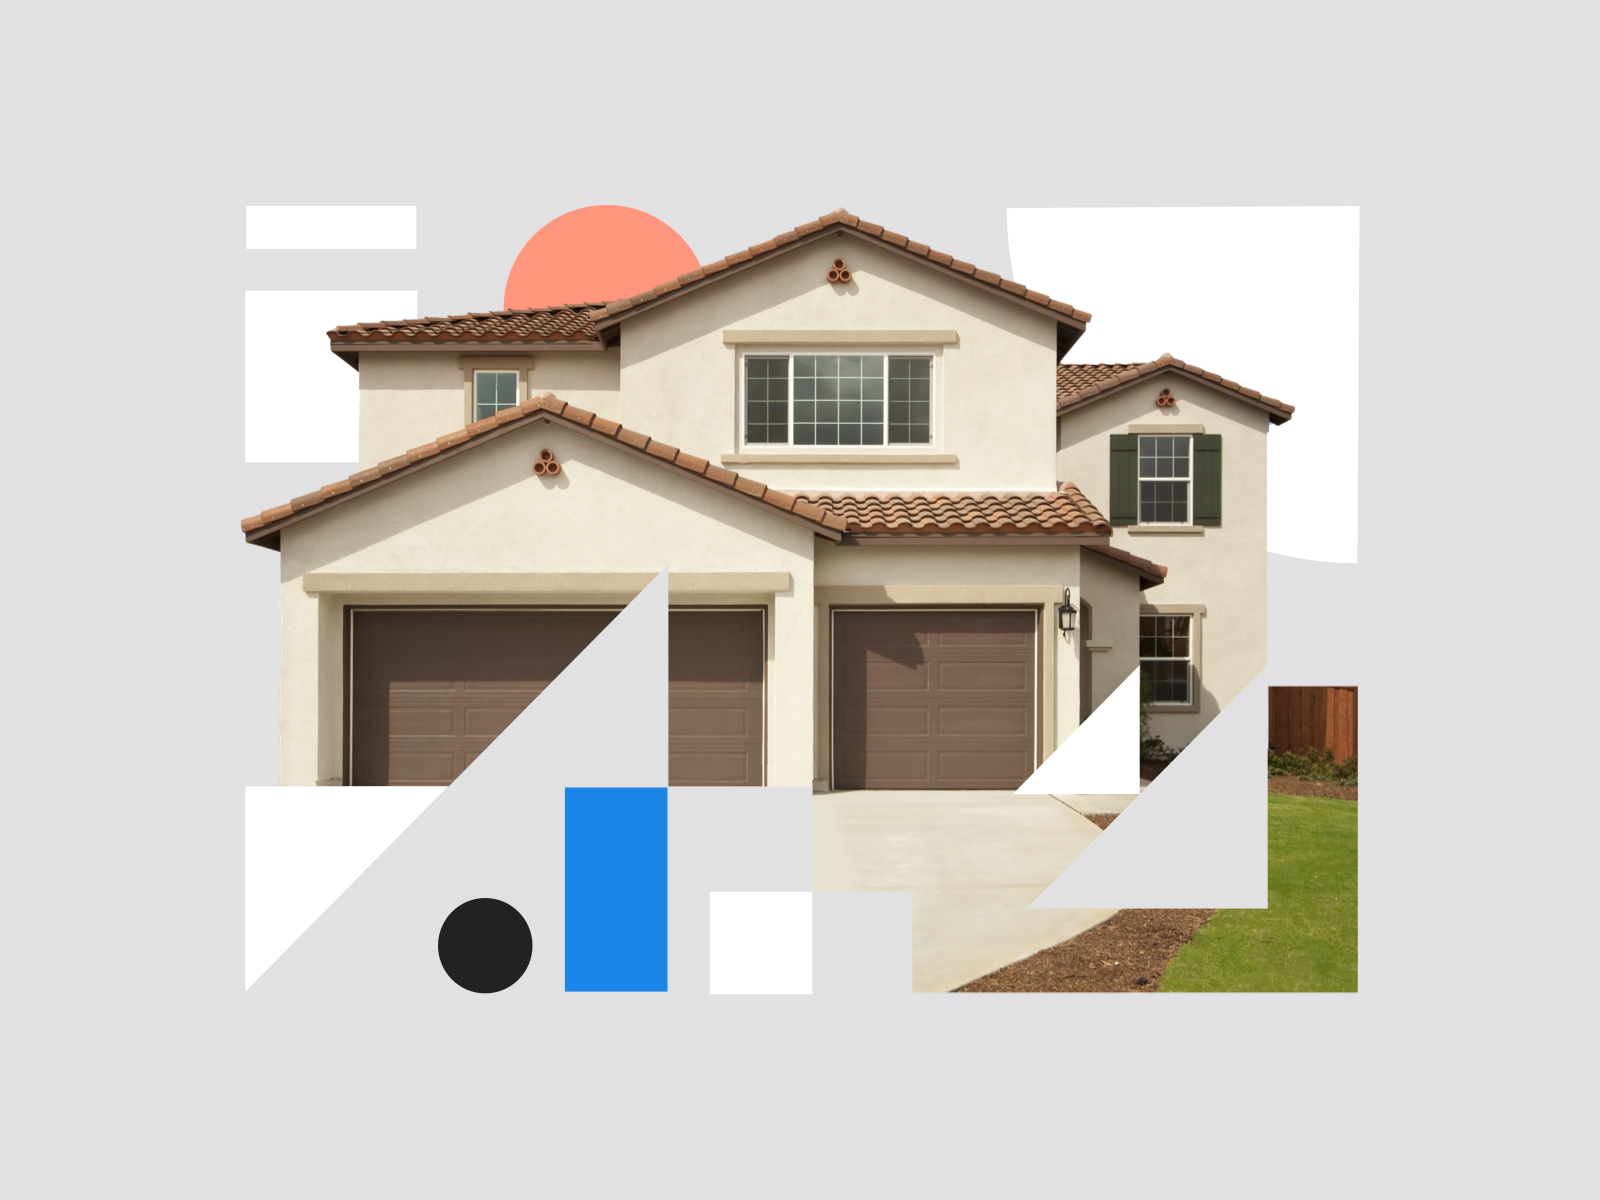 Abstract illustration for recruiting posts abstract brand collage geometic home house illustration real estate shapes